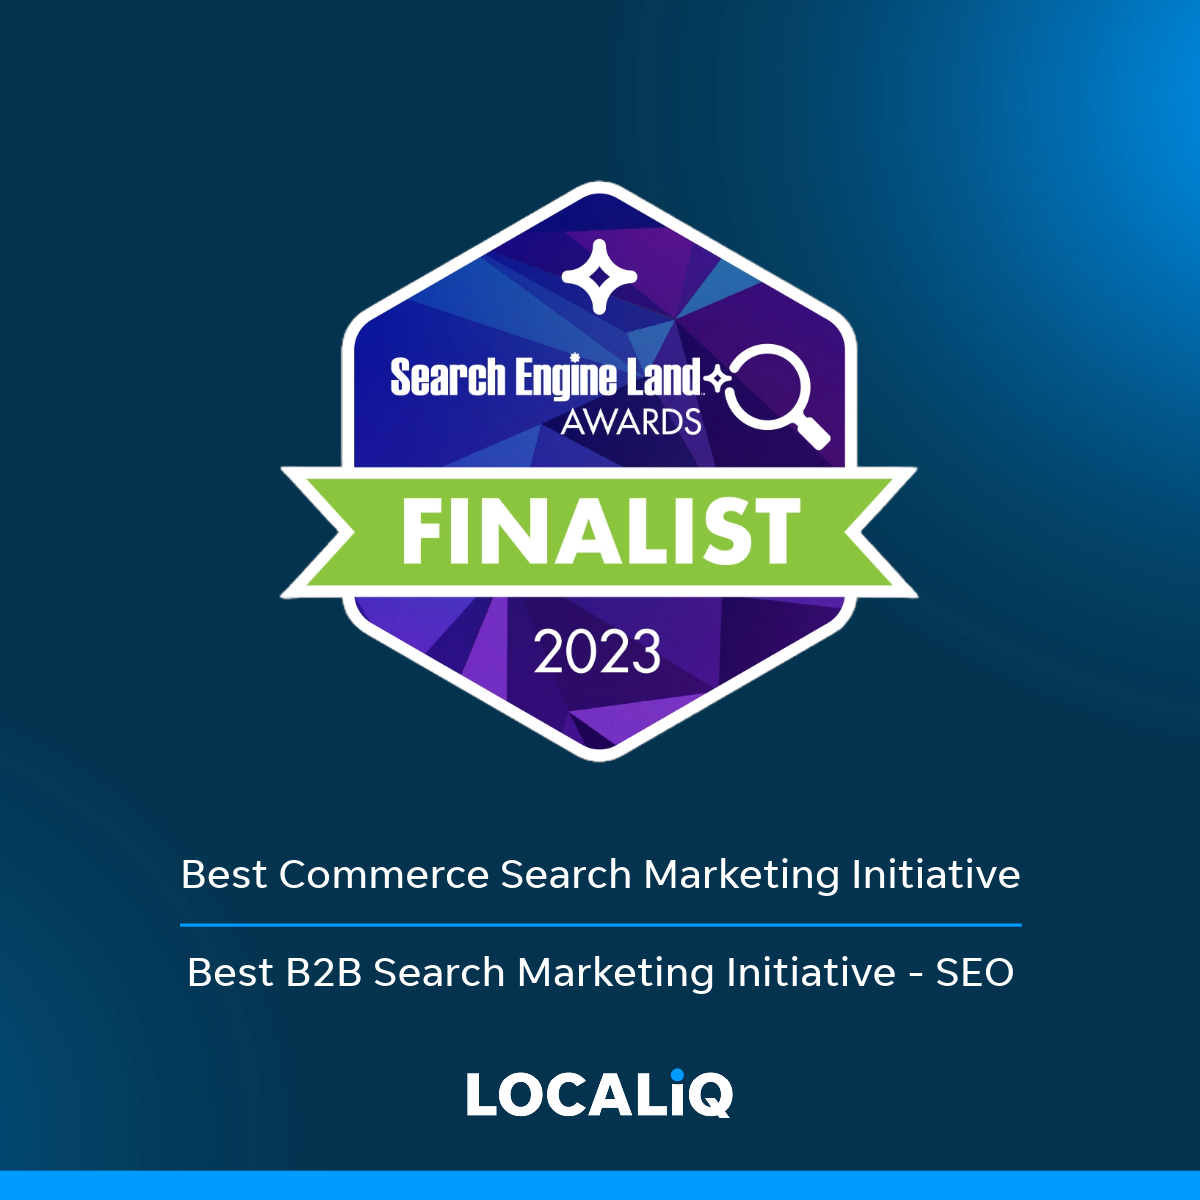 LOCALiQ Announced as Finalists in Two Categories at Search Engine Land Awards 2023